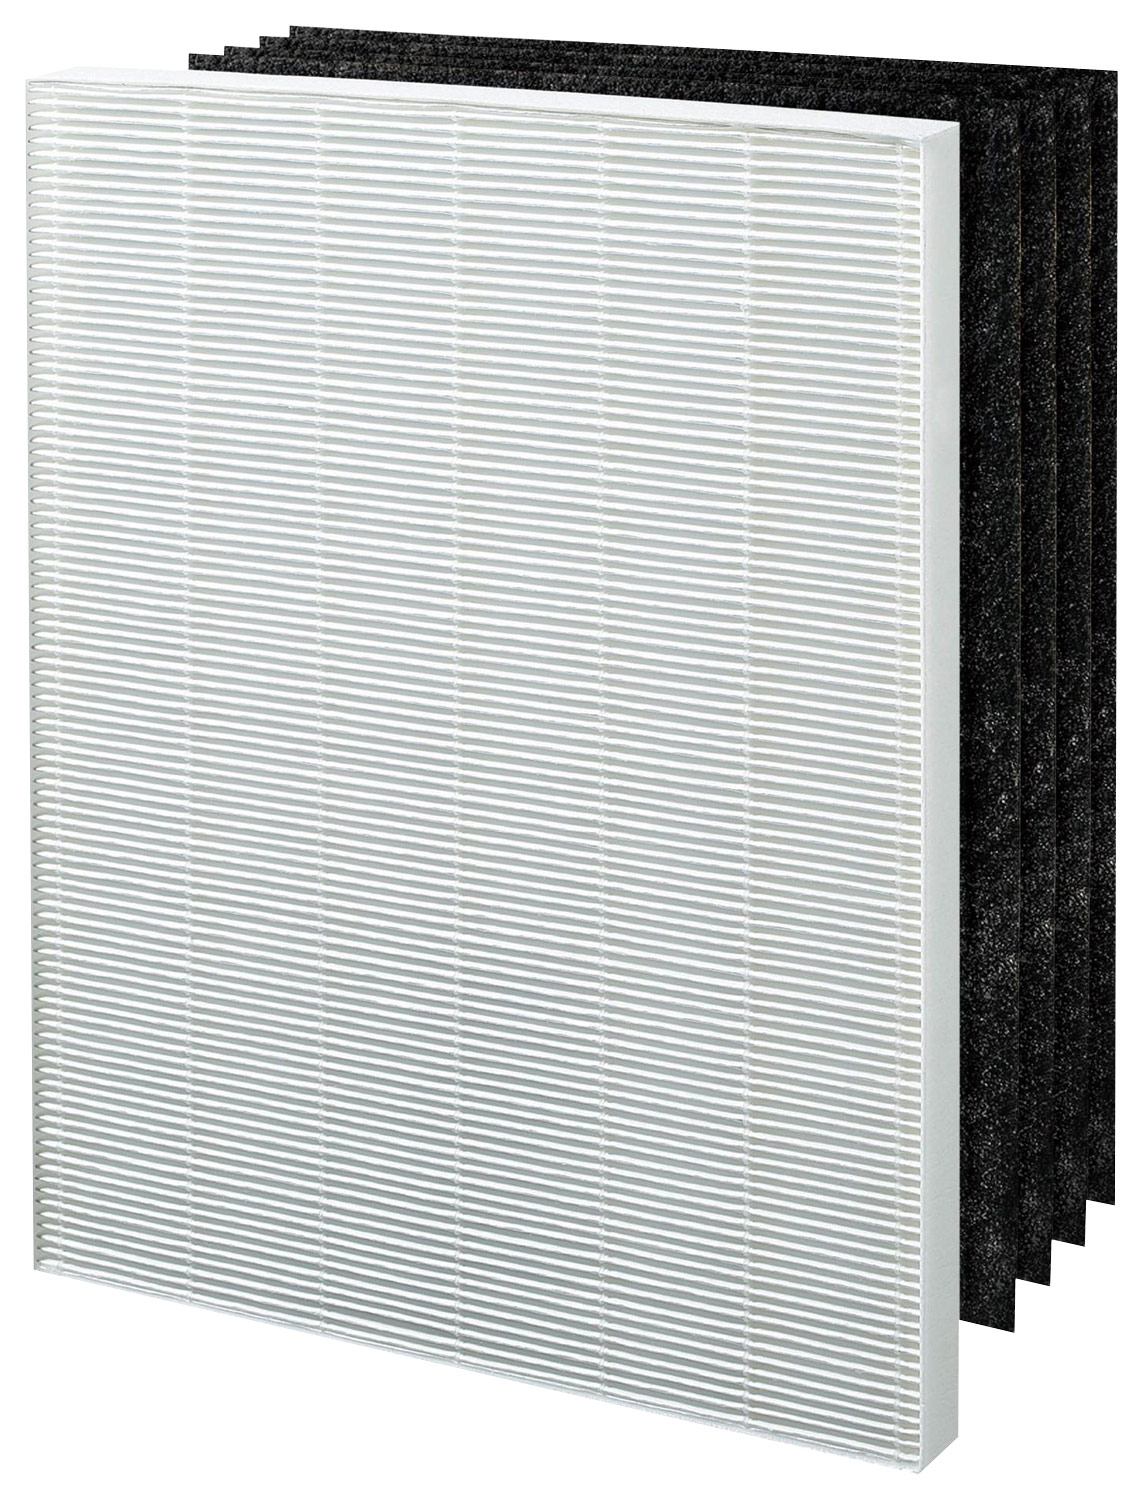 Replacement Filter Set for Winix P300, 5300, 5500 and 6300 Air Cleaners - Black/White was $79.99 now $46.99 (41.0% off)